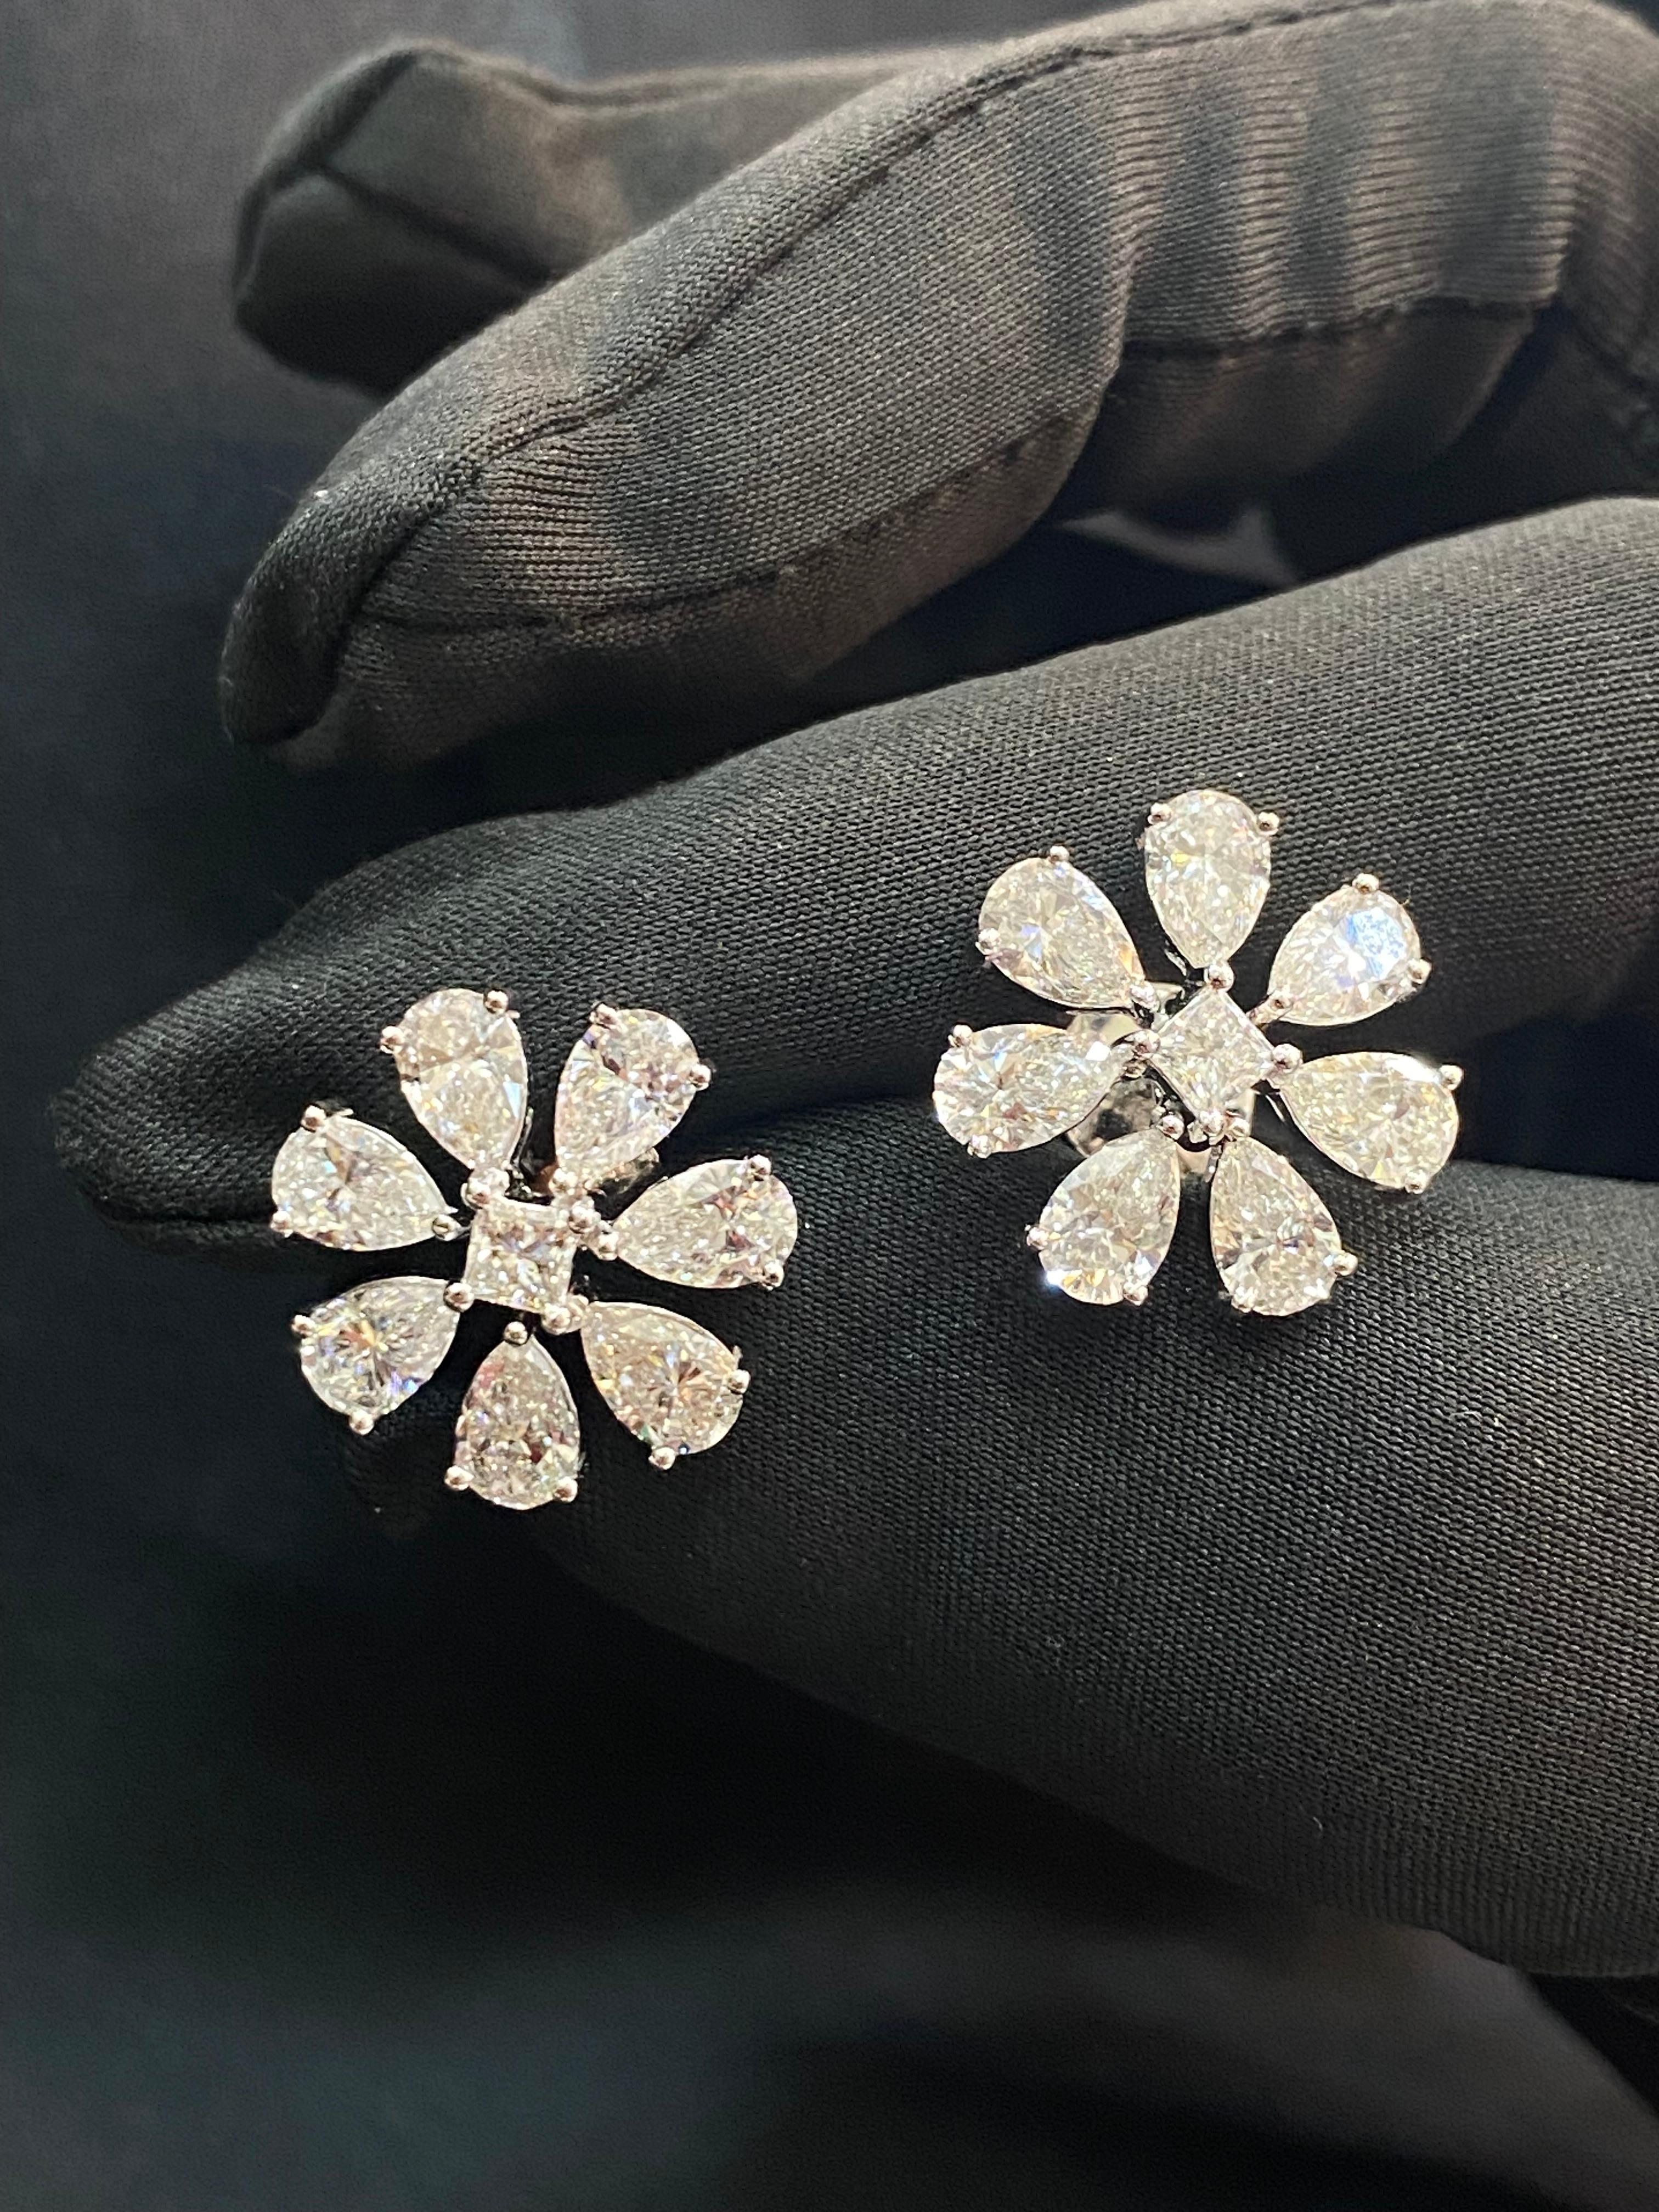 This elegant stud earrings feature a remarkable 4.50 carats of pear princess natural diamonds, set within a beautiful big flower design crafted from 14K white gold!

Specifications : 

Diamond Weight : 4.50 Cts [4.20 Cts Pear + 0.30 Cts